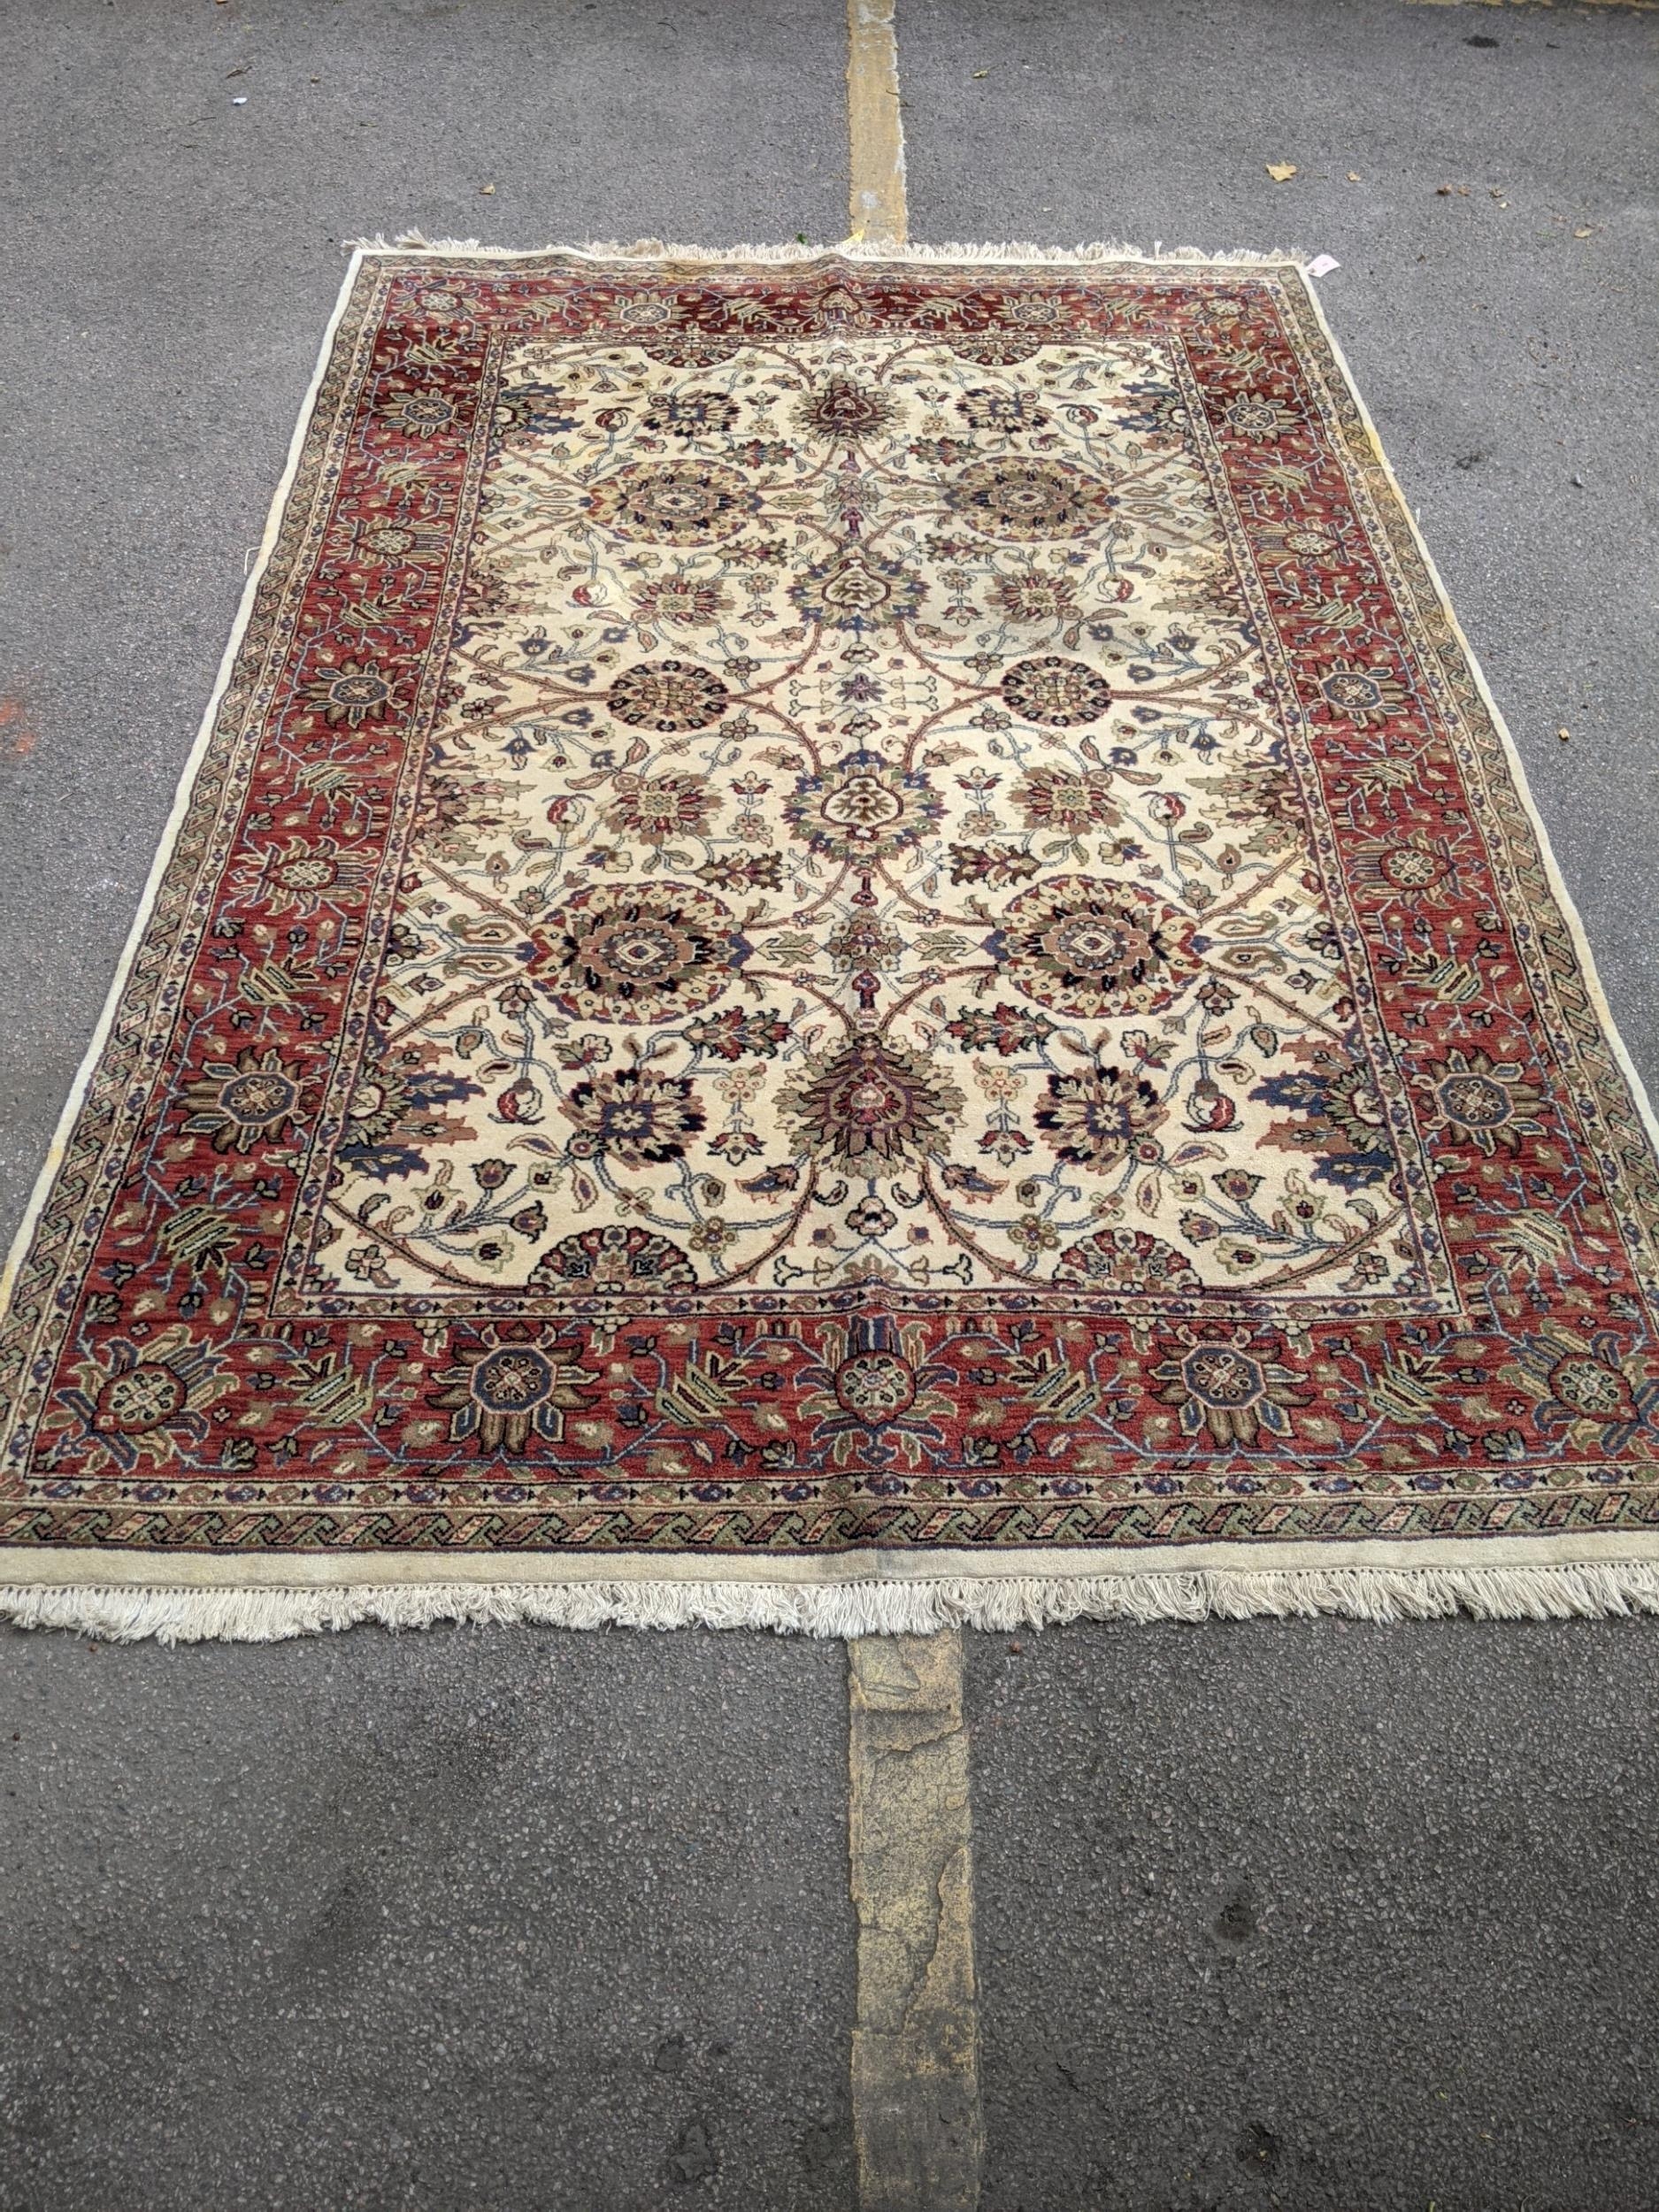 An antique Sharaen rug decorated symmetrically with four large medallions and four smaller ones on a